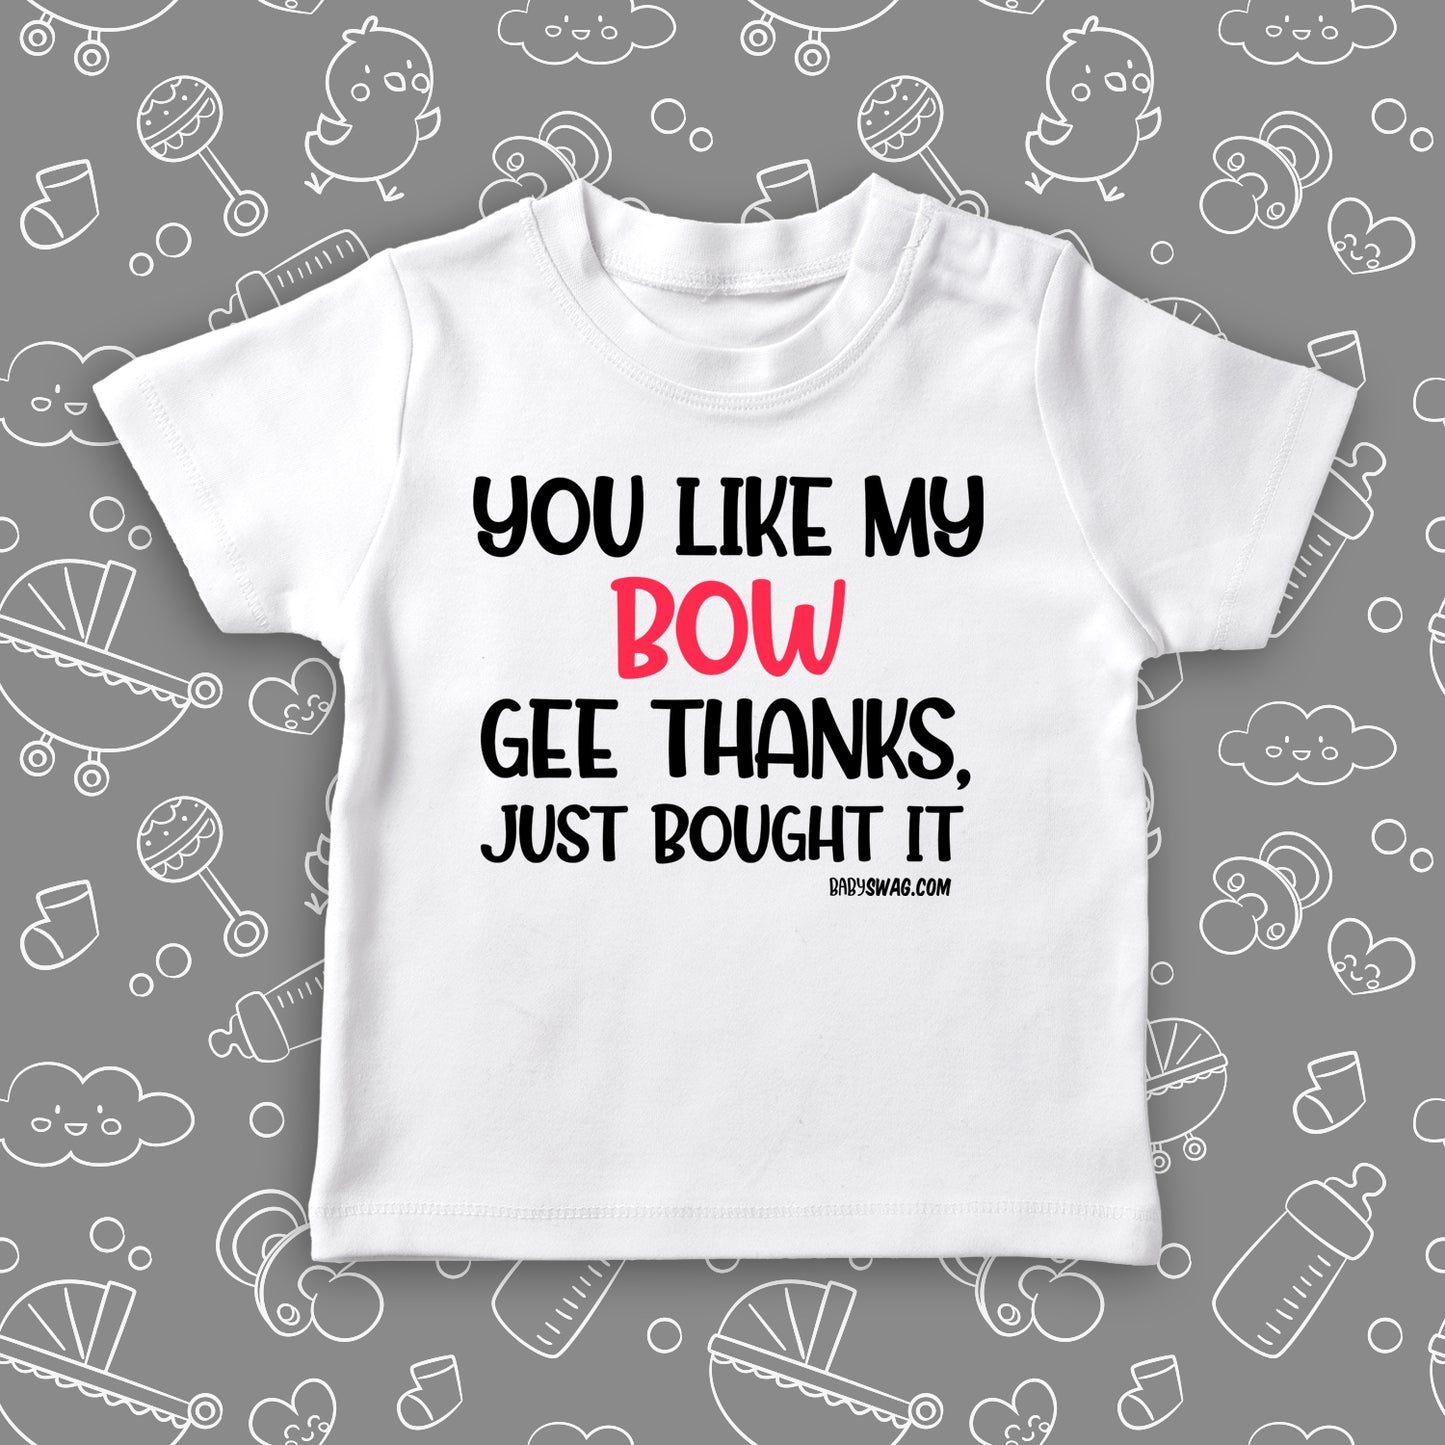 "You Like My Bow" toddler girl shirt in white. 